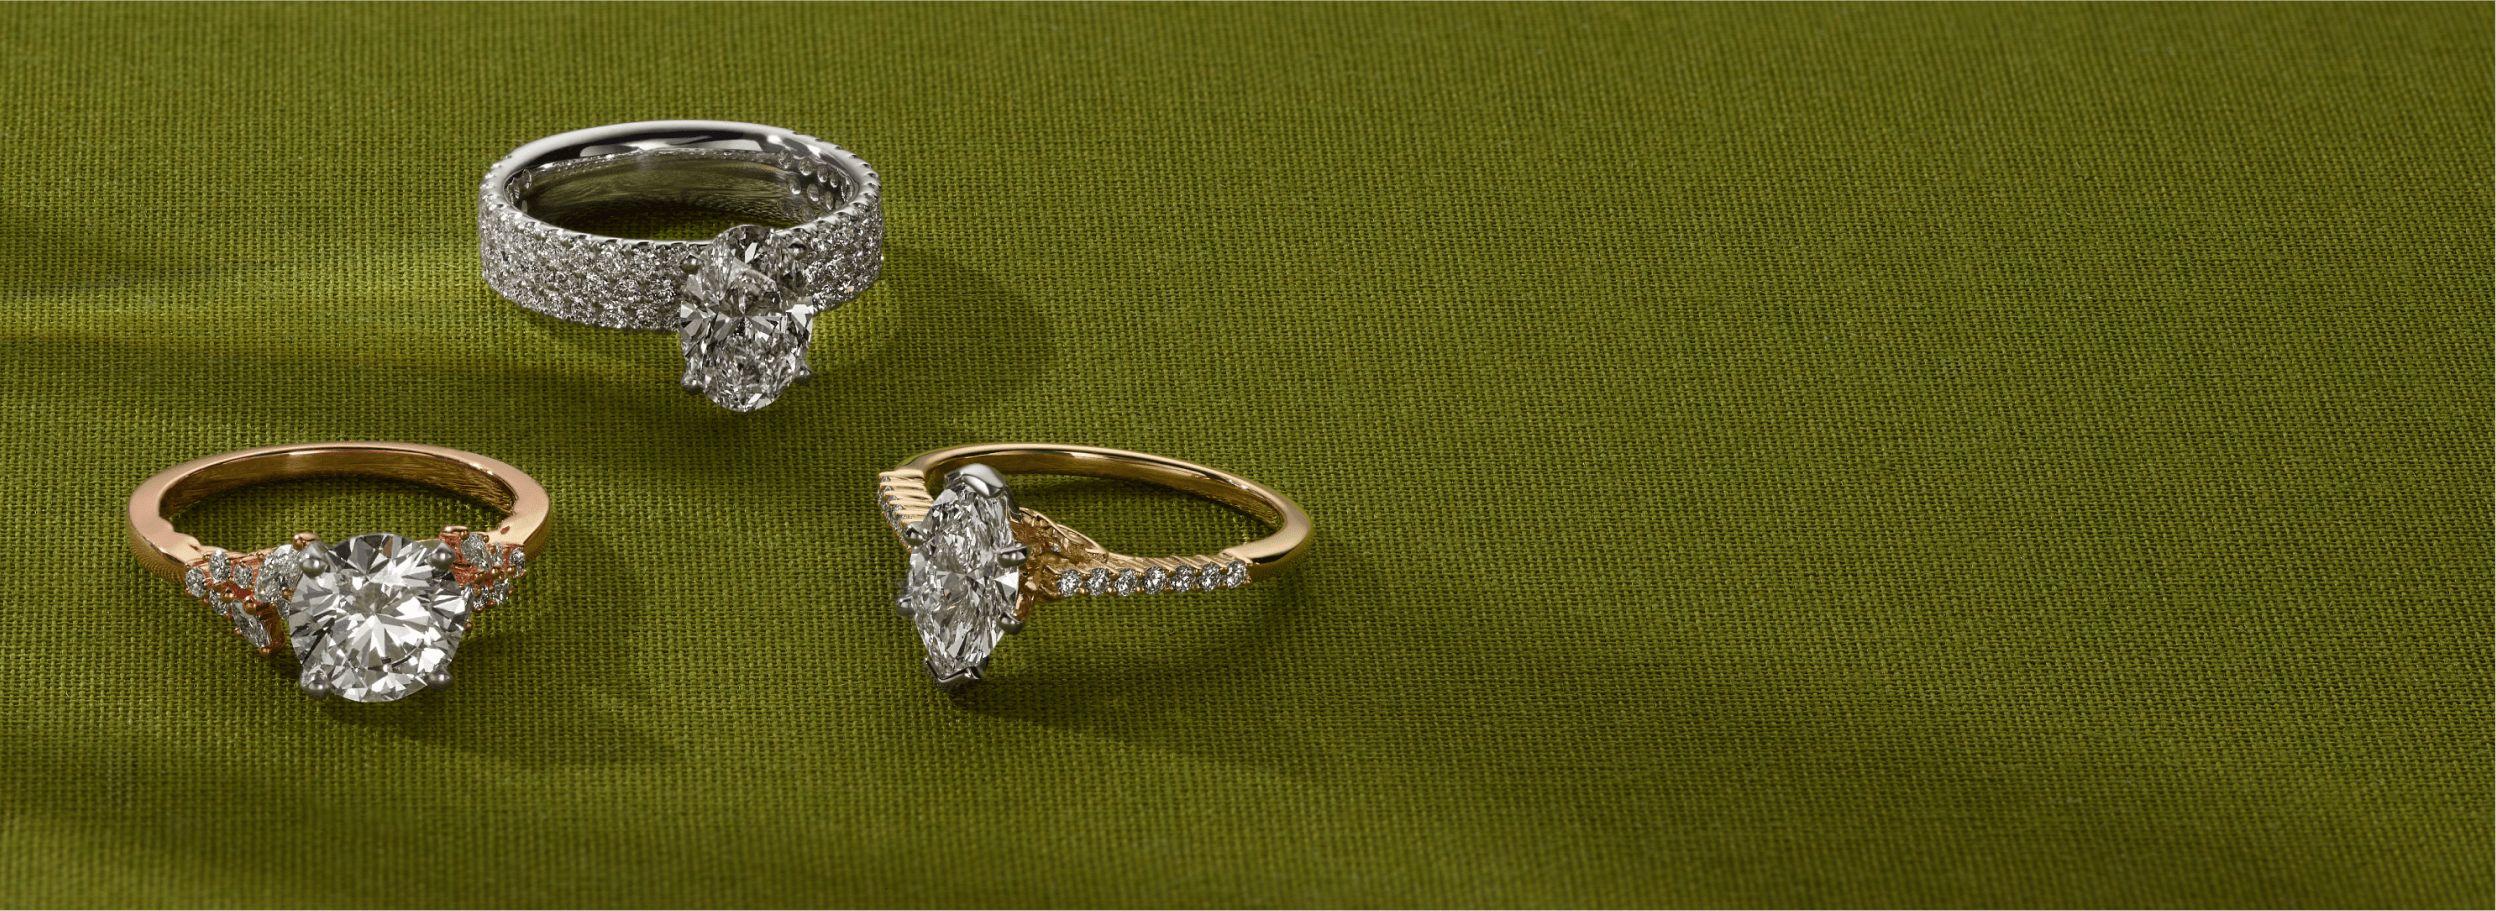 Three engagement rings of different styles